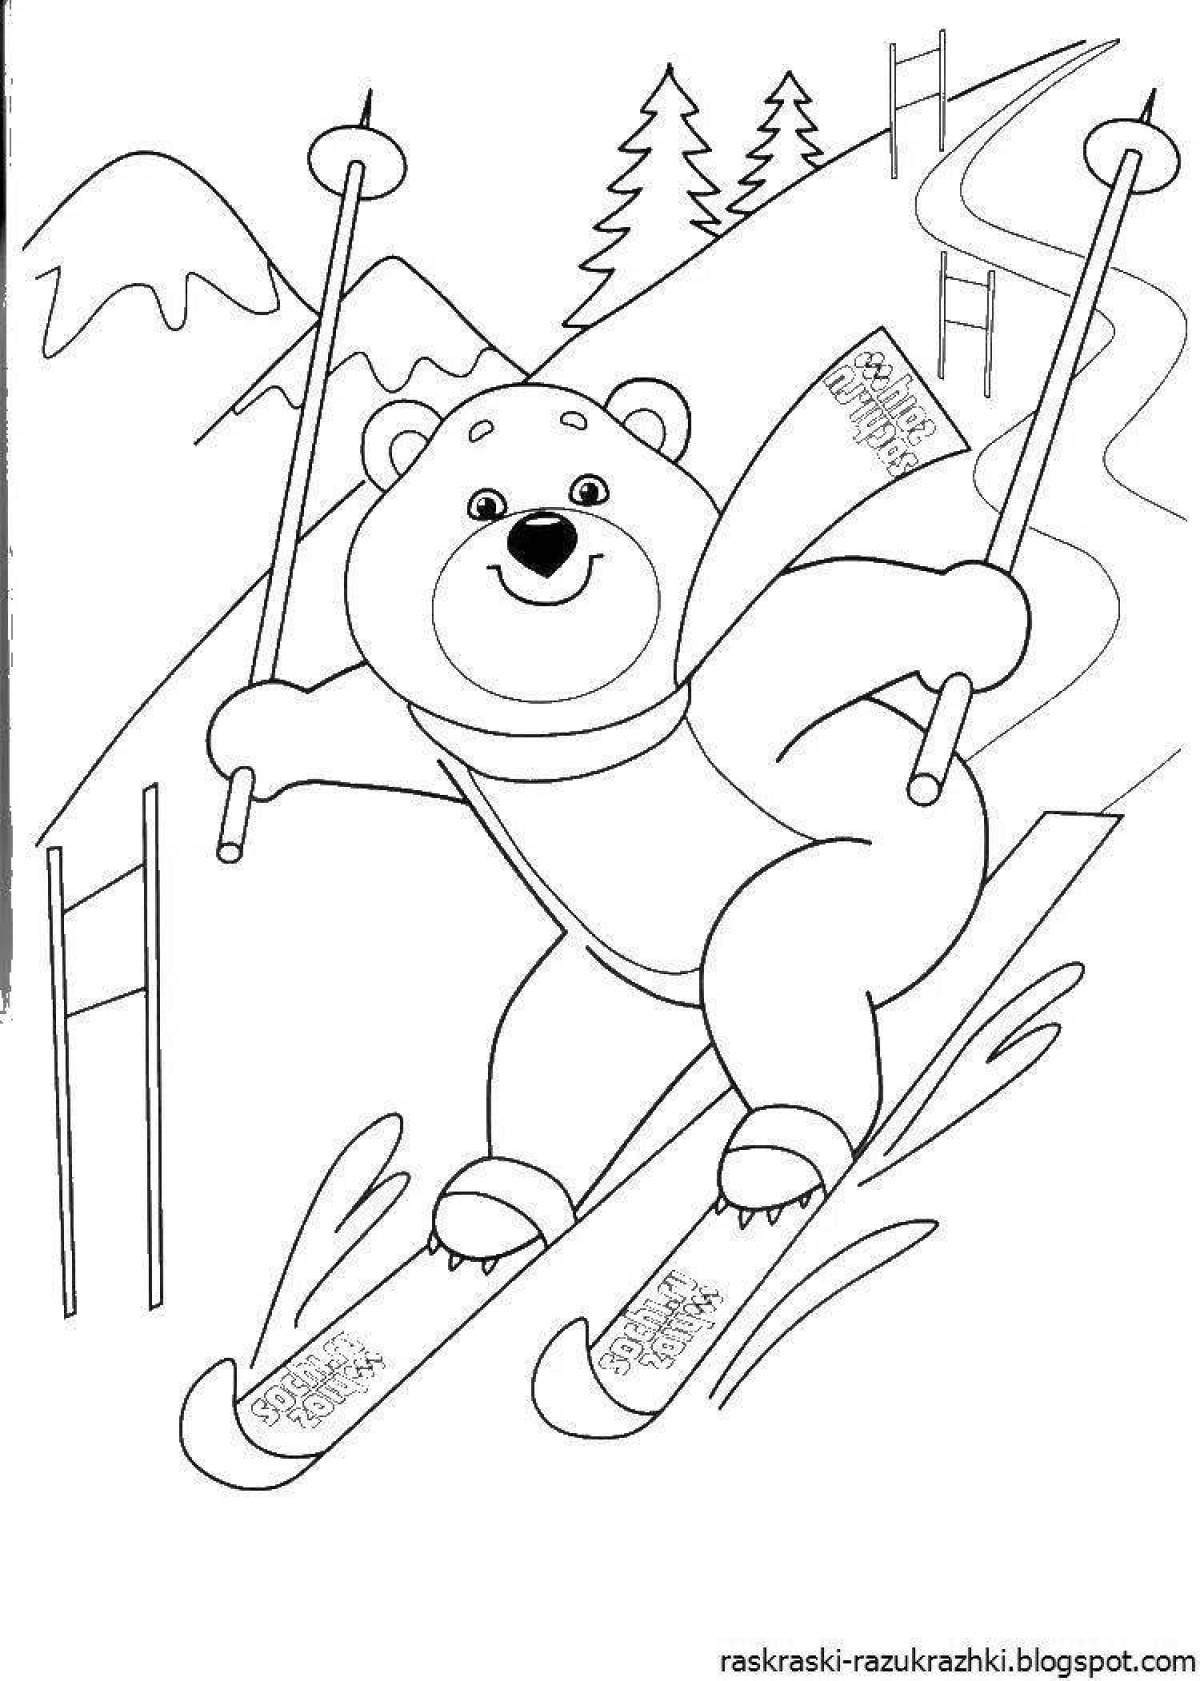 Olympic bear holiday coloring for kids